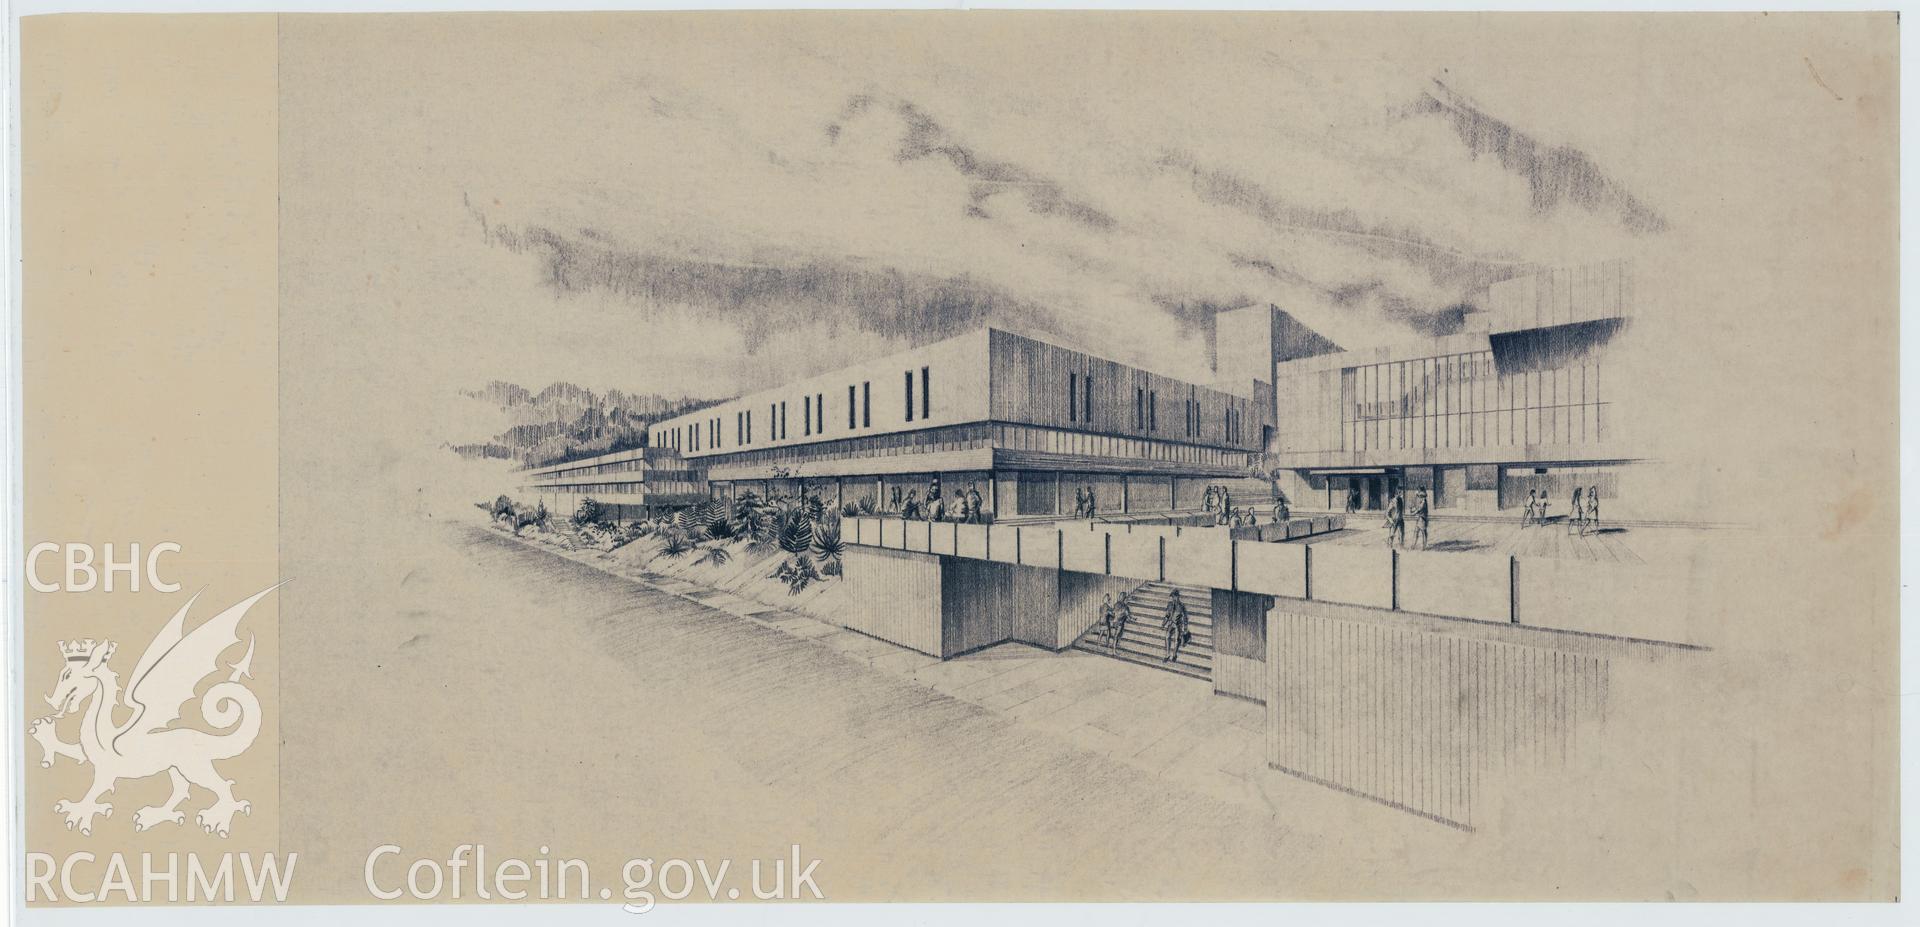 Digital copy of a perspective view of the proposed Library Arts Complex at University College Aberystwyth, produced by Percy Thomas Partnership. Scale 1:500.